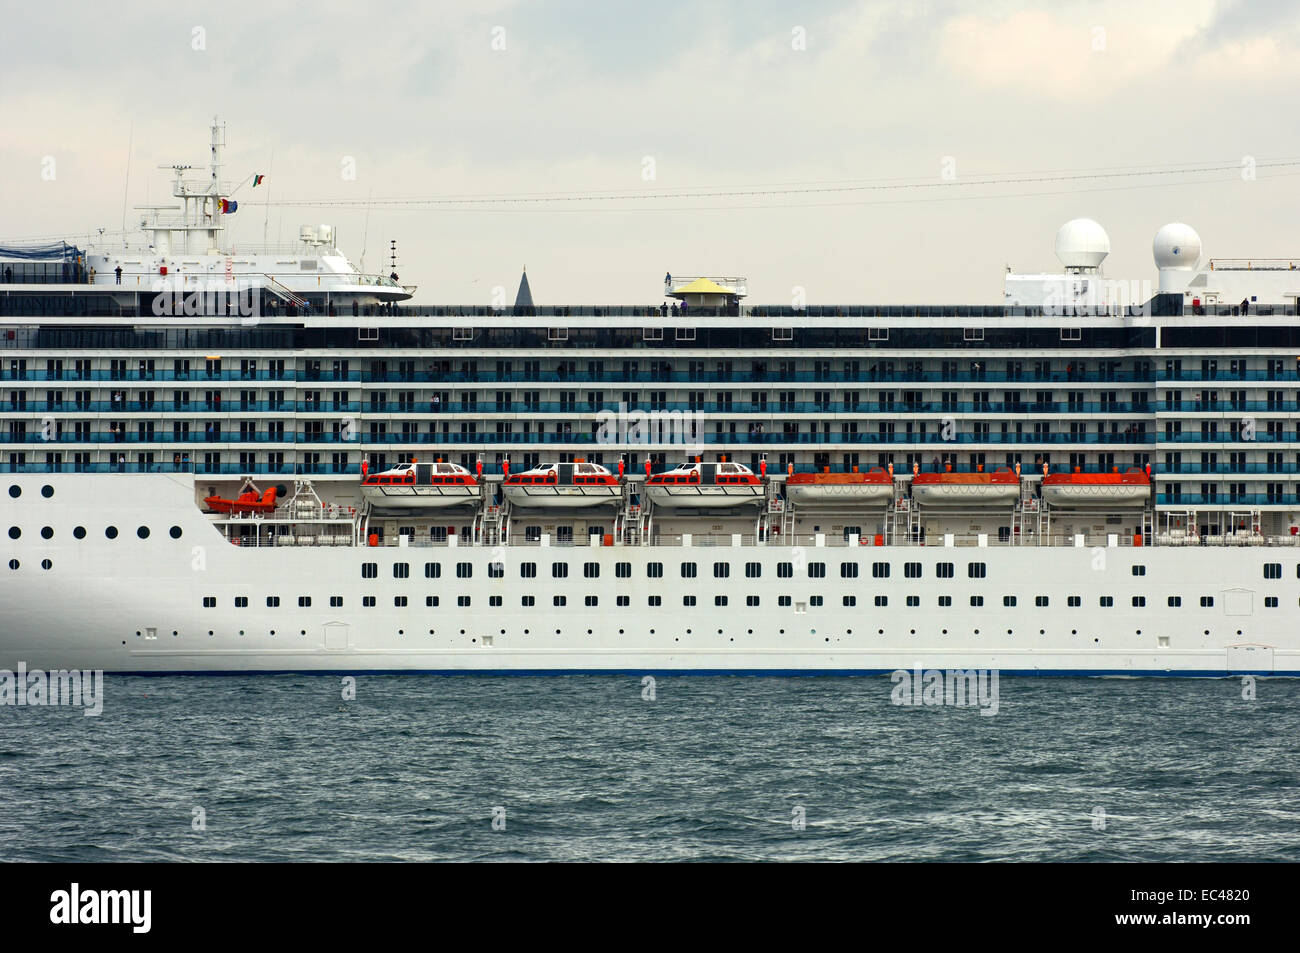 Exterior Cruise Ship On Starboard Side Stock Photo 2288661631